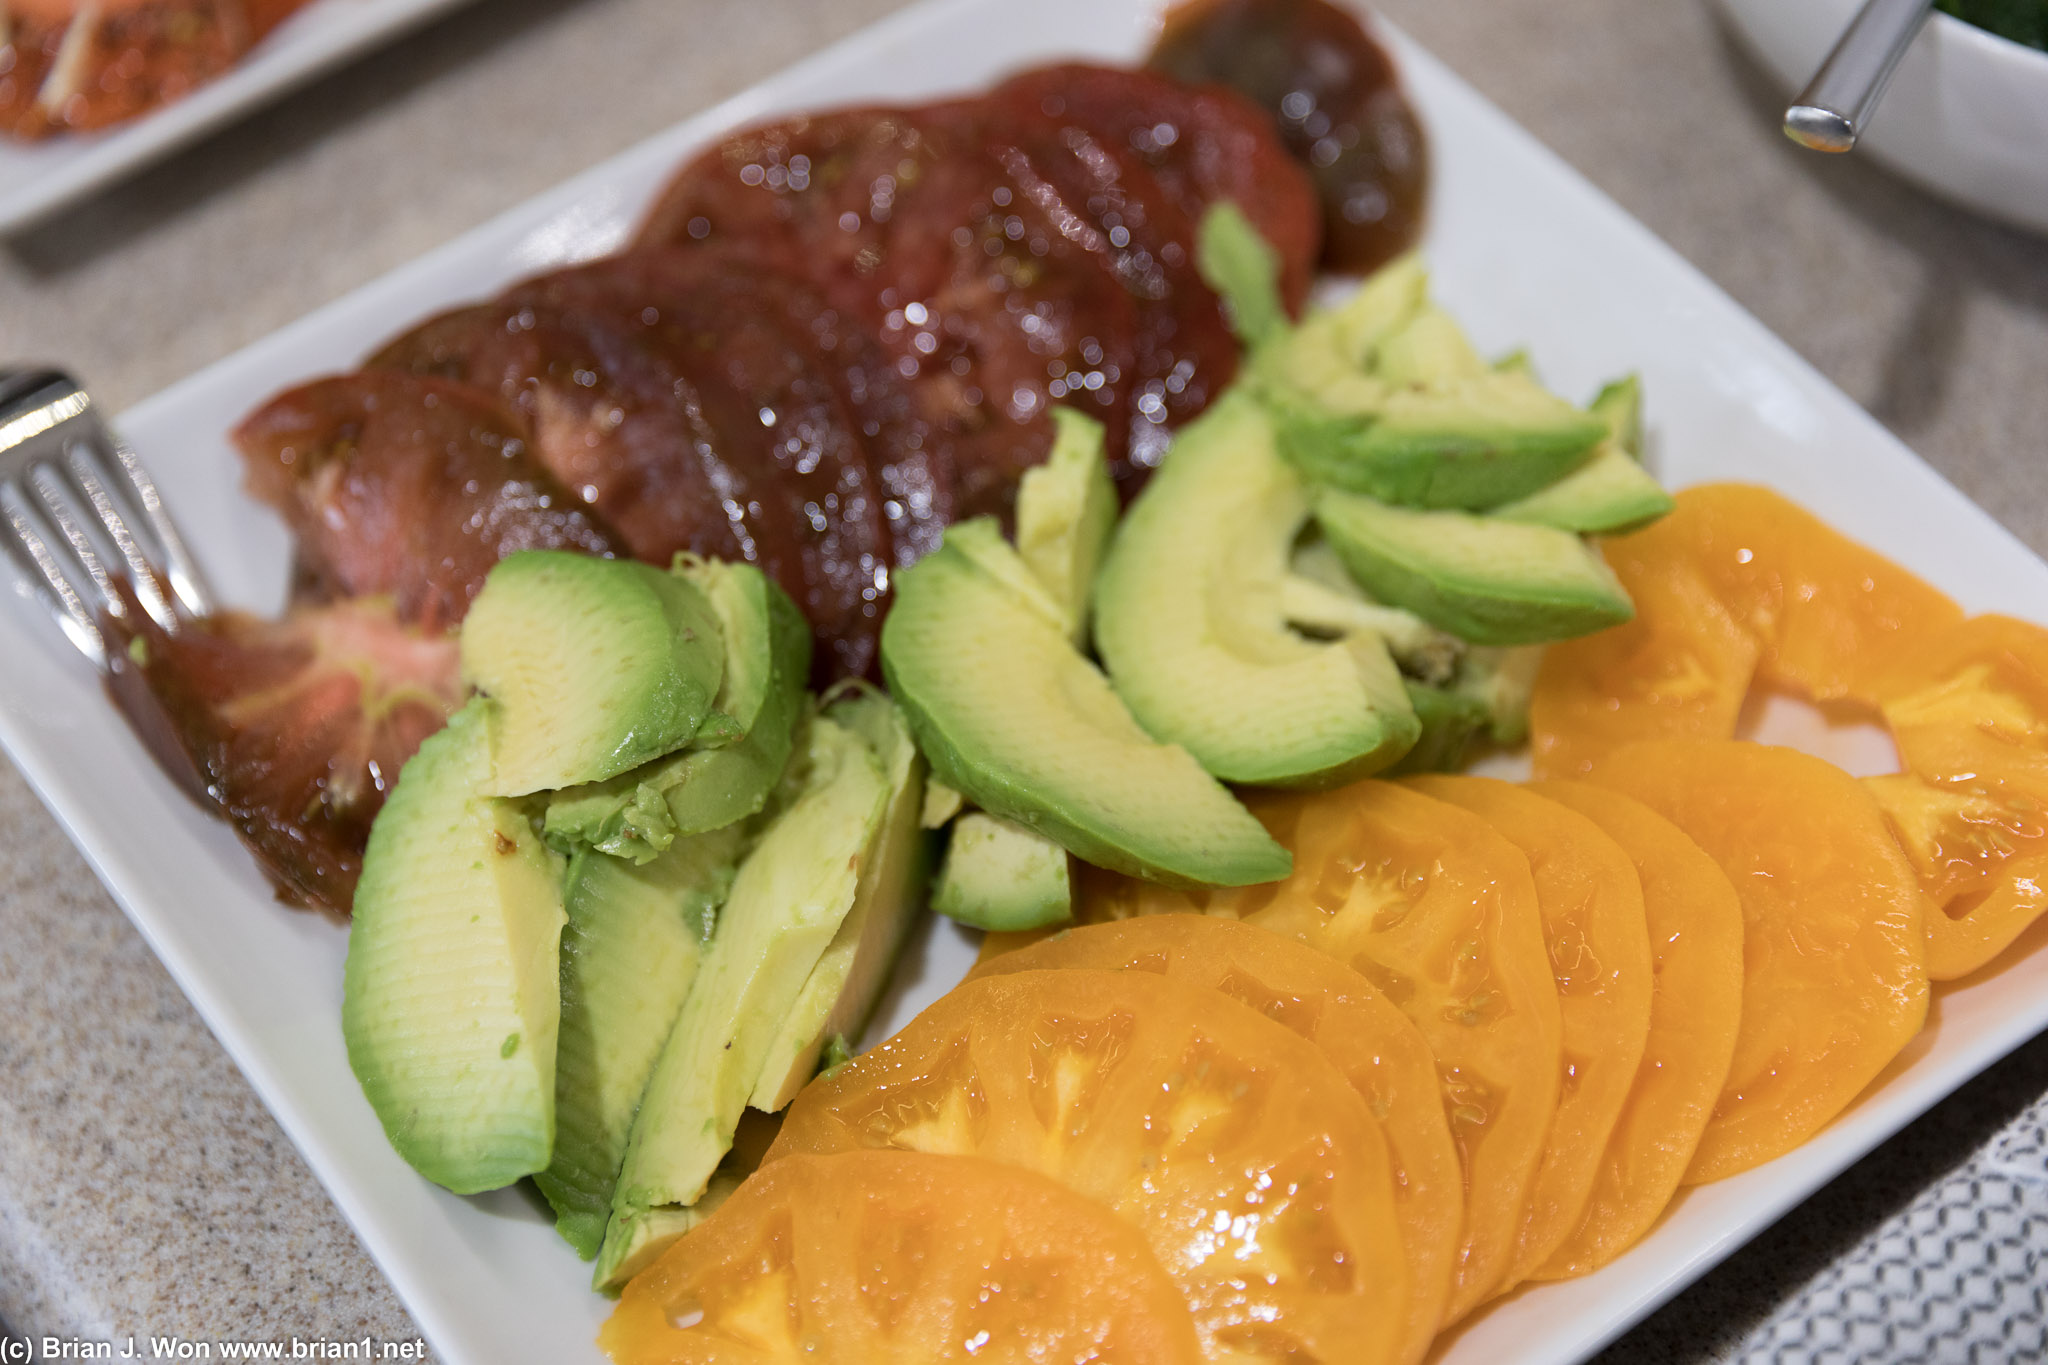 Tomatoes and avocado.